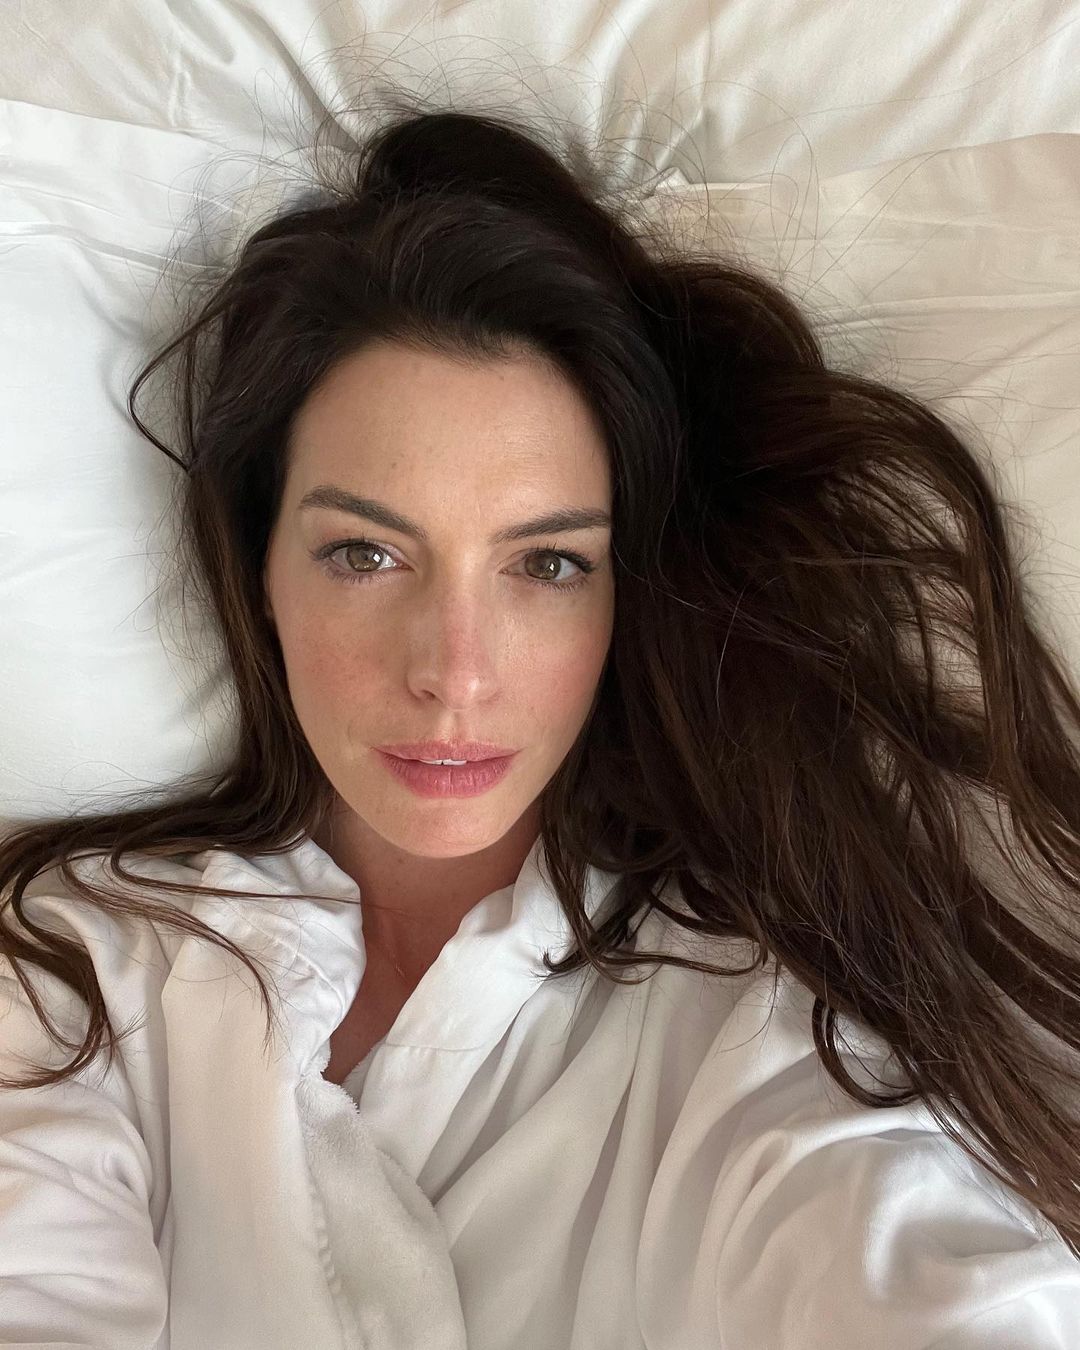 Anne Hathaway lying on the bed in a white button-down shirt